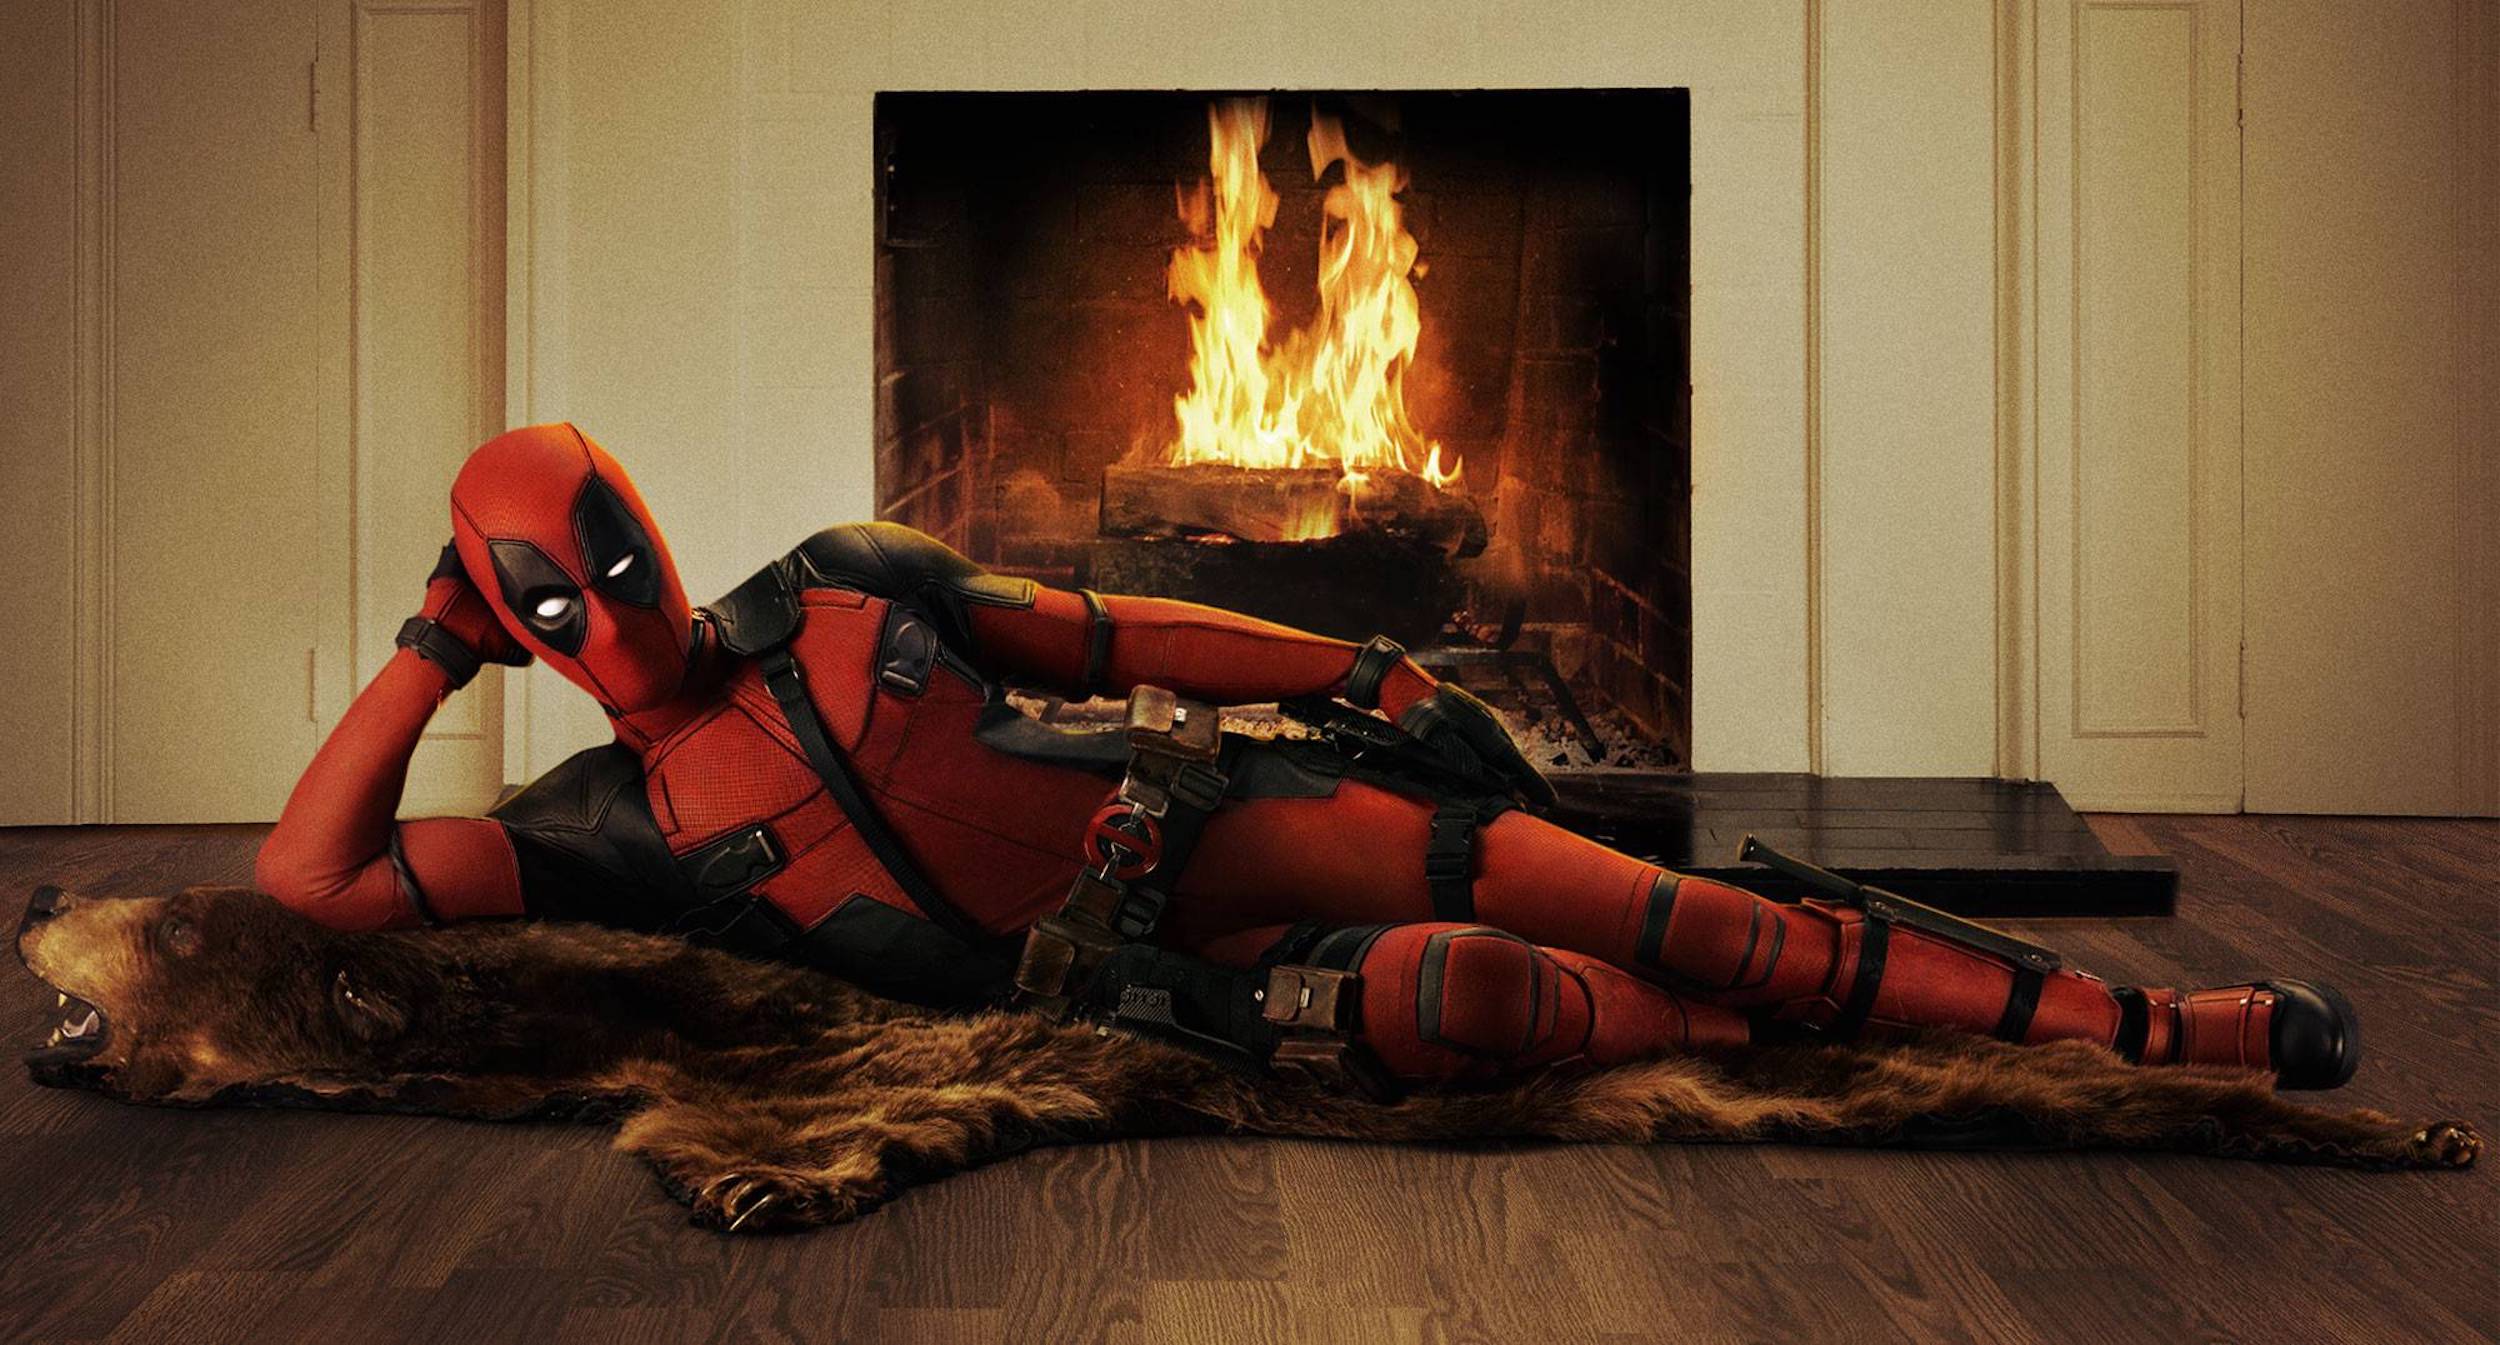 This image was from Deadpool (2016) and showed Deadopol seductively laying by a fireplace and speaking to the audience. 